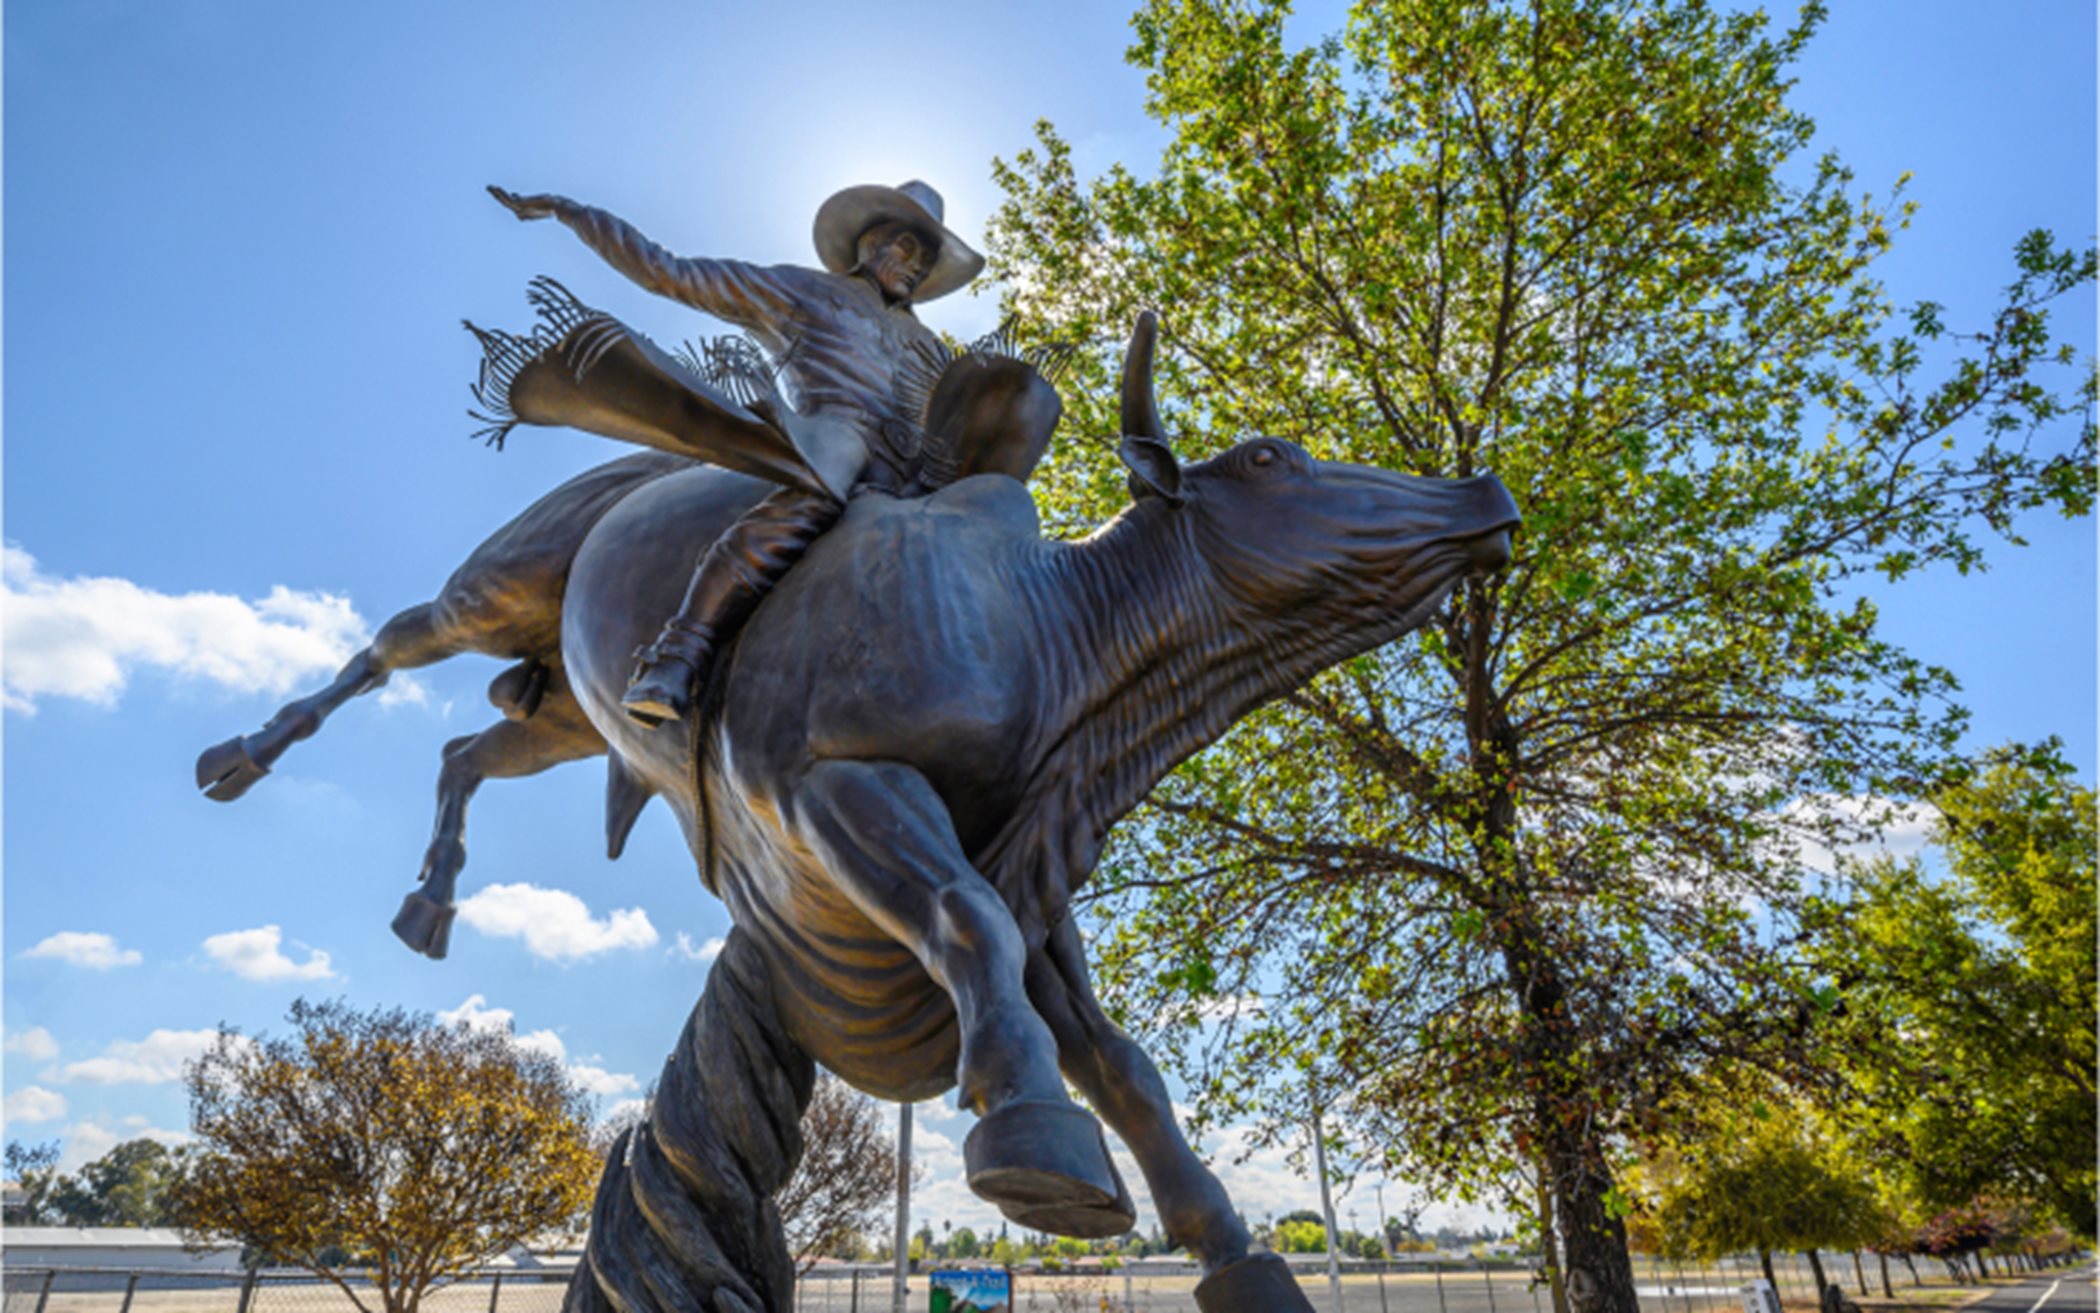 The Ranch at Heritage Grove statue of legendary bull rider Lane Frost